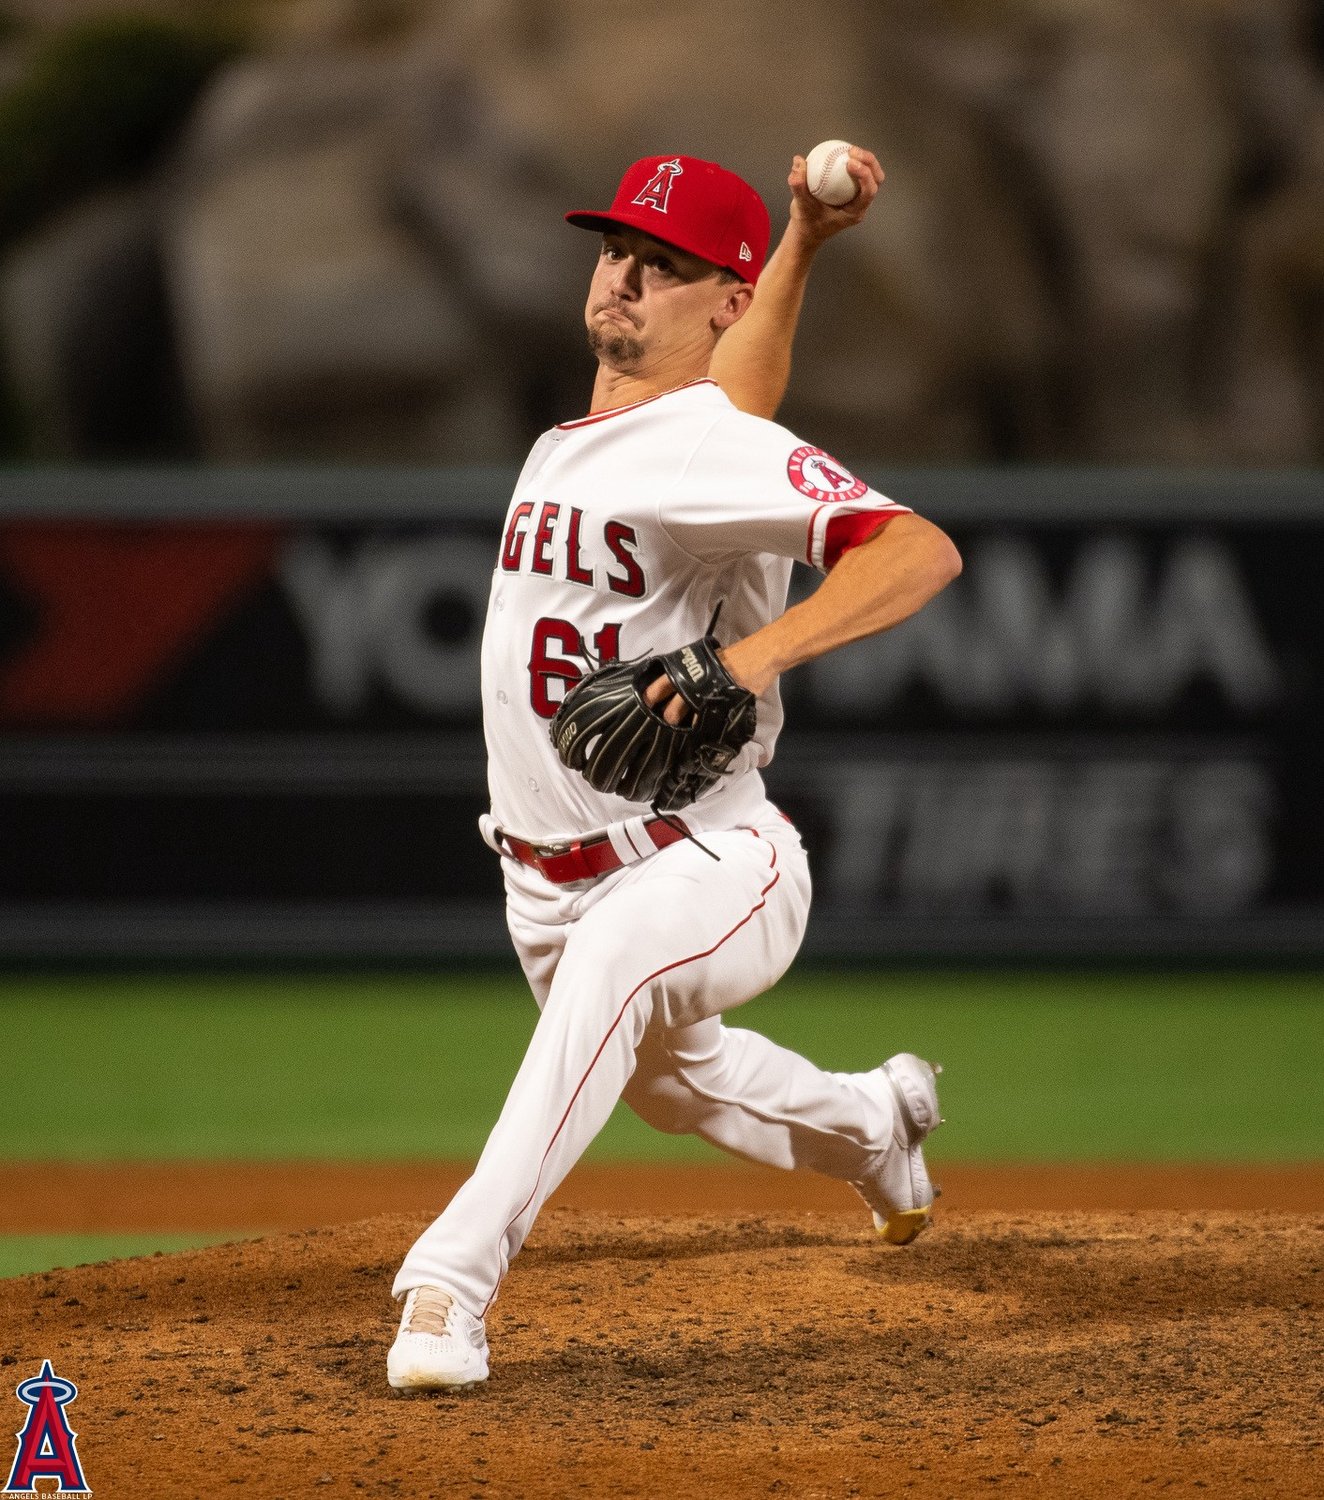 Austin Warren, who played at Terry Sanford High School, is now pitching for the Los Angeles Angels.